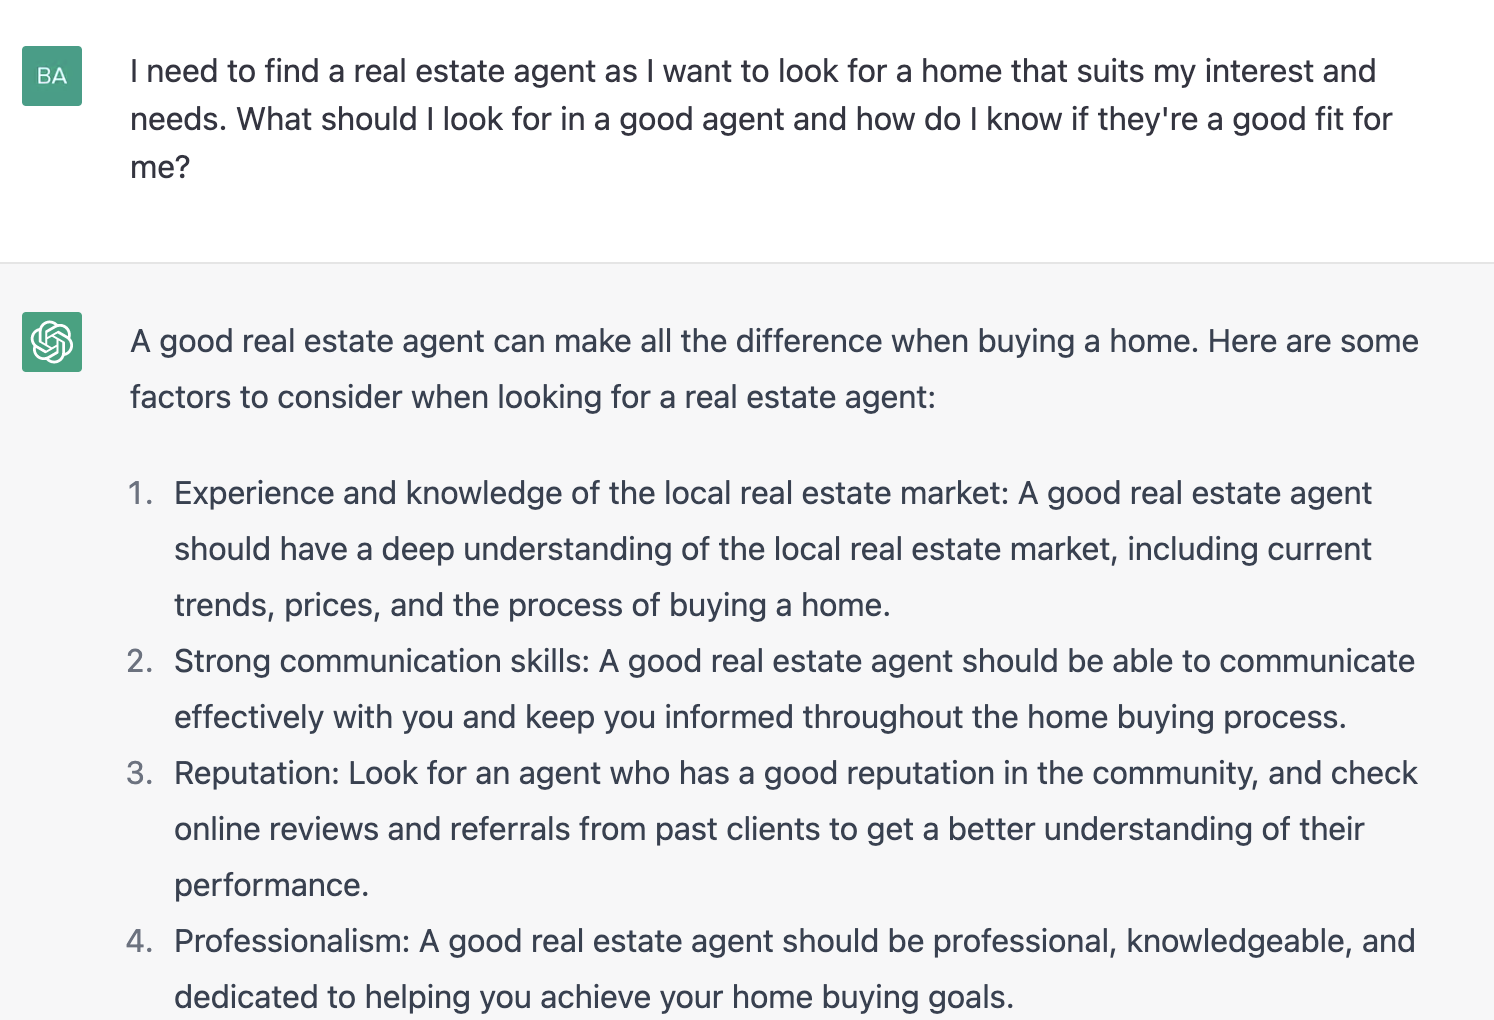 ChatGPT prompt about the factors to consider when looking for a real estate agent